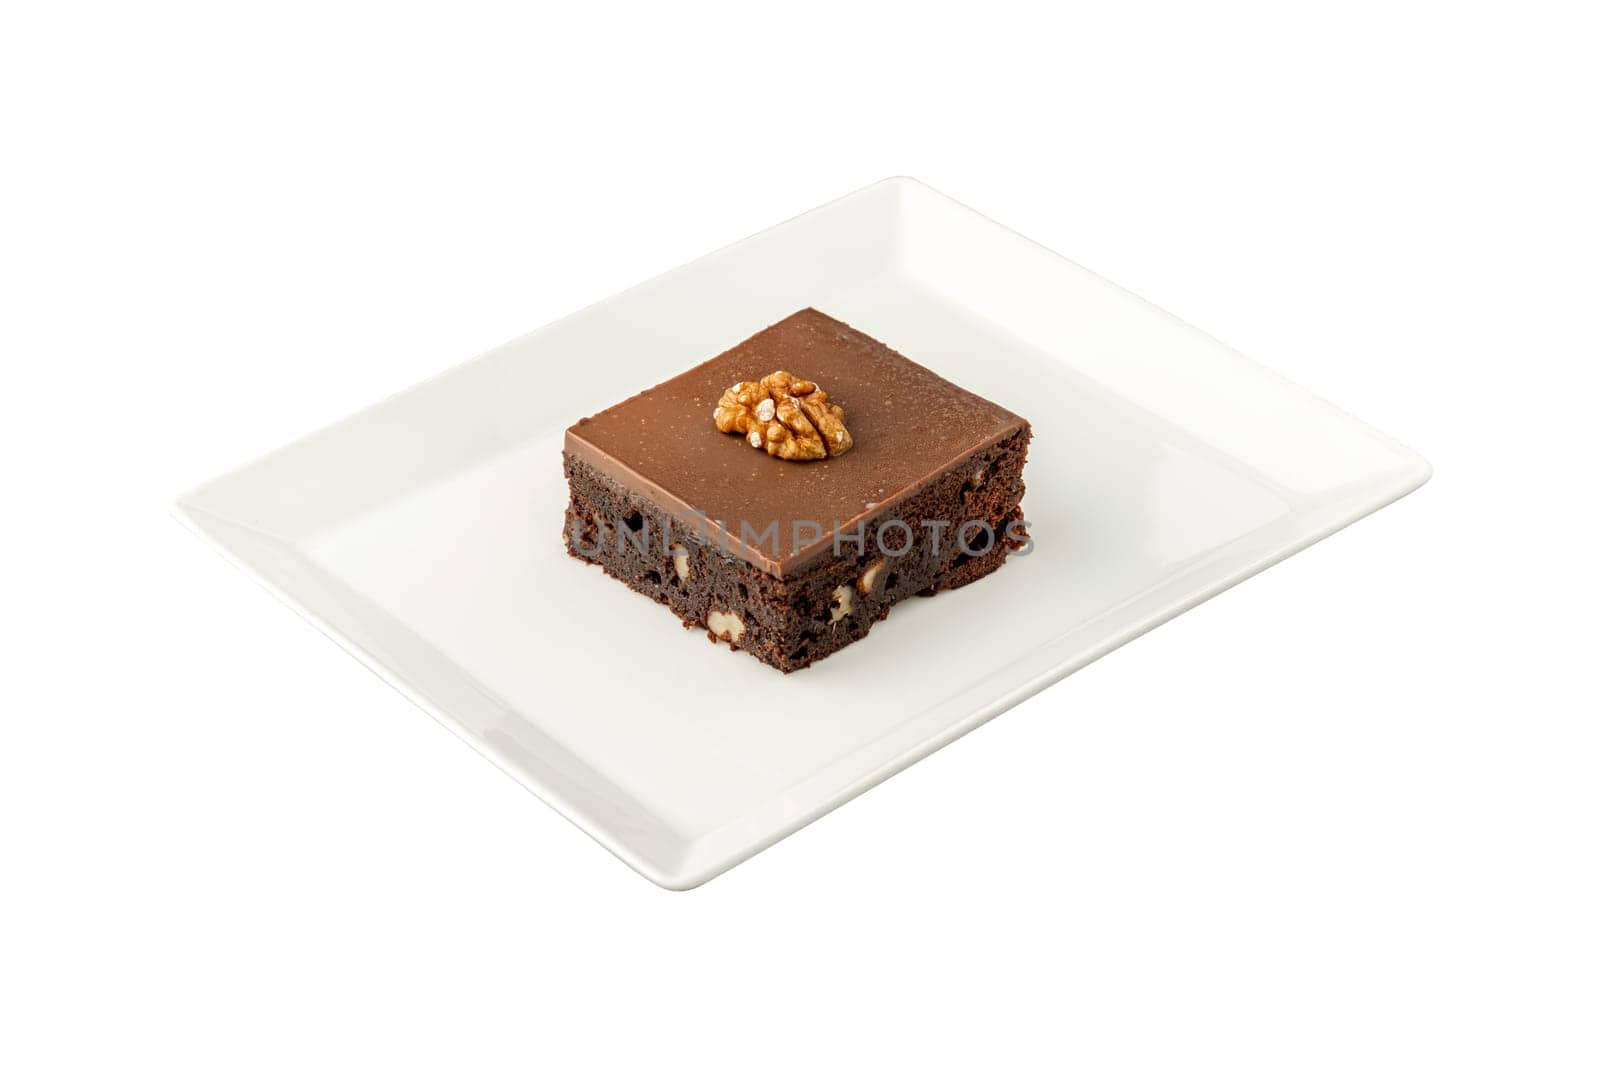 Walnut and dark chocolate brownie on a white porcelain plate on white background by Sonat